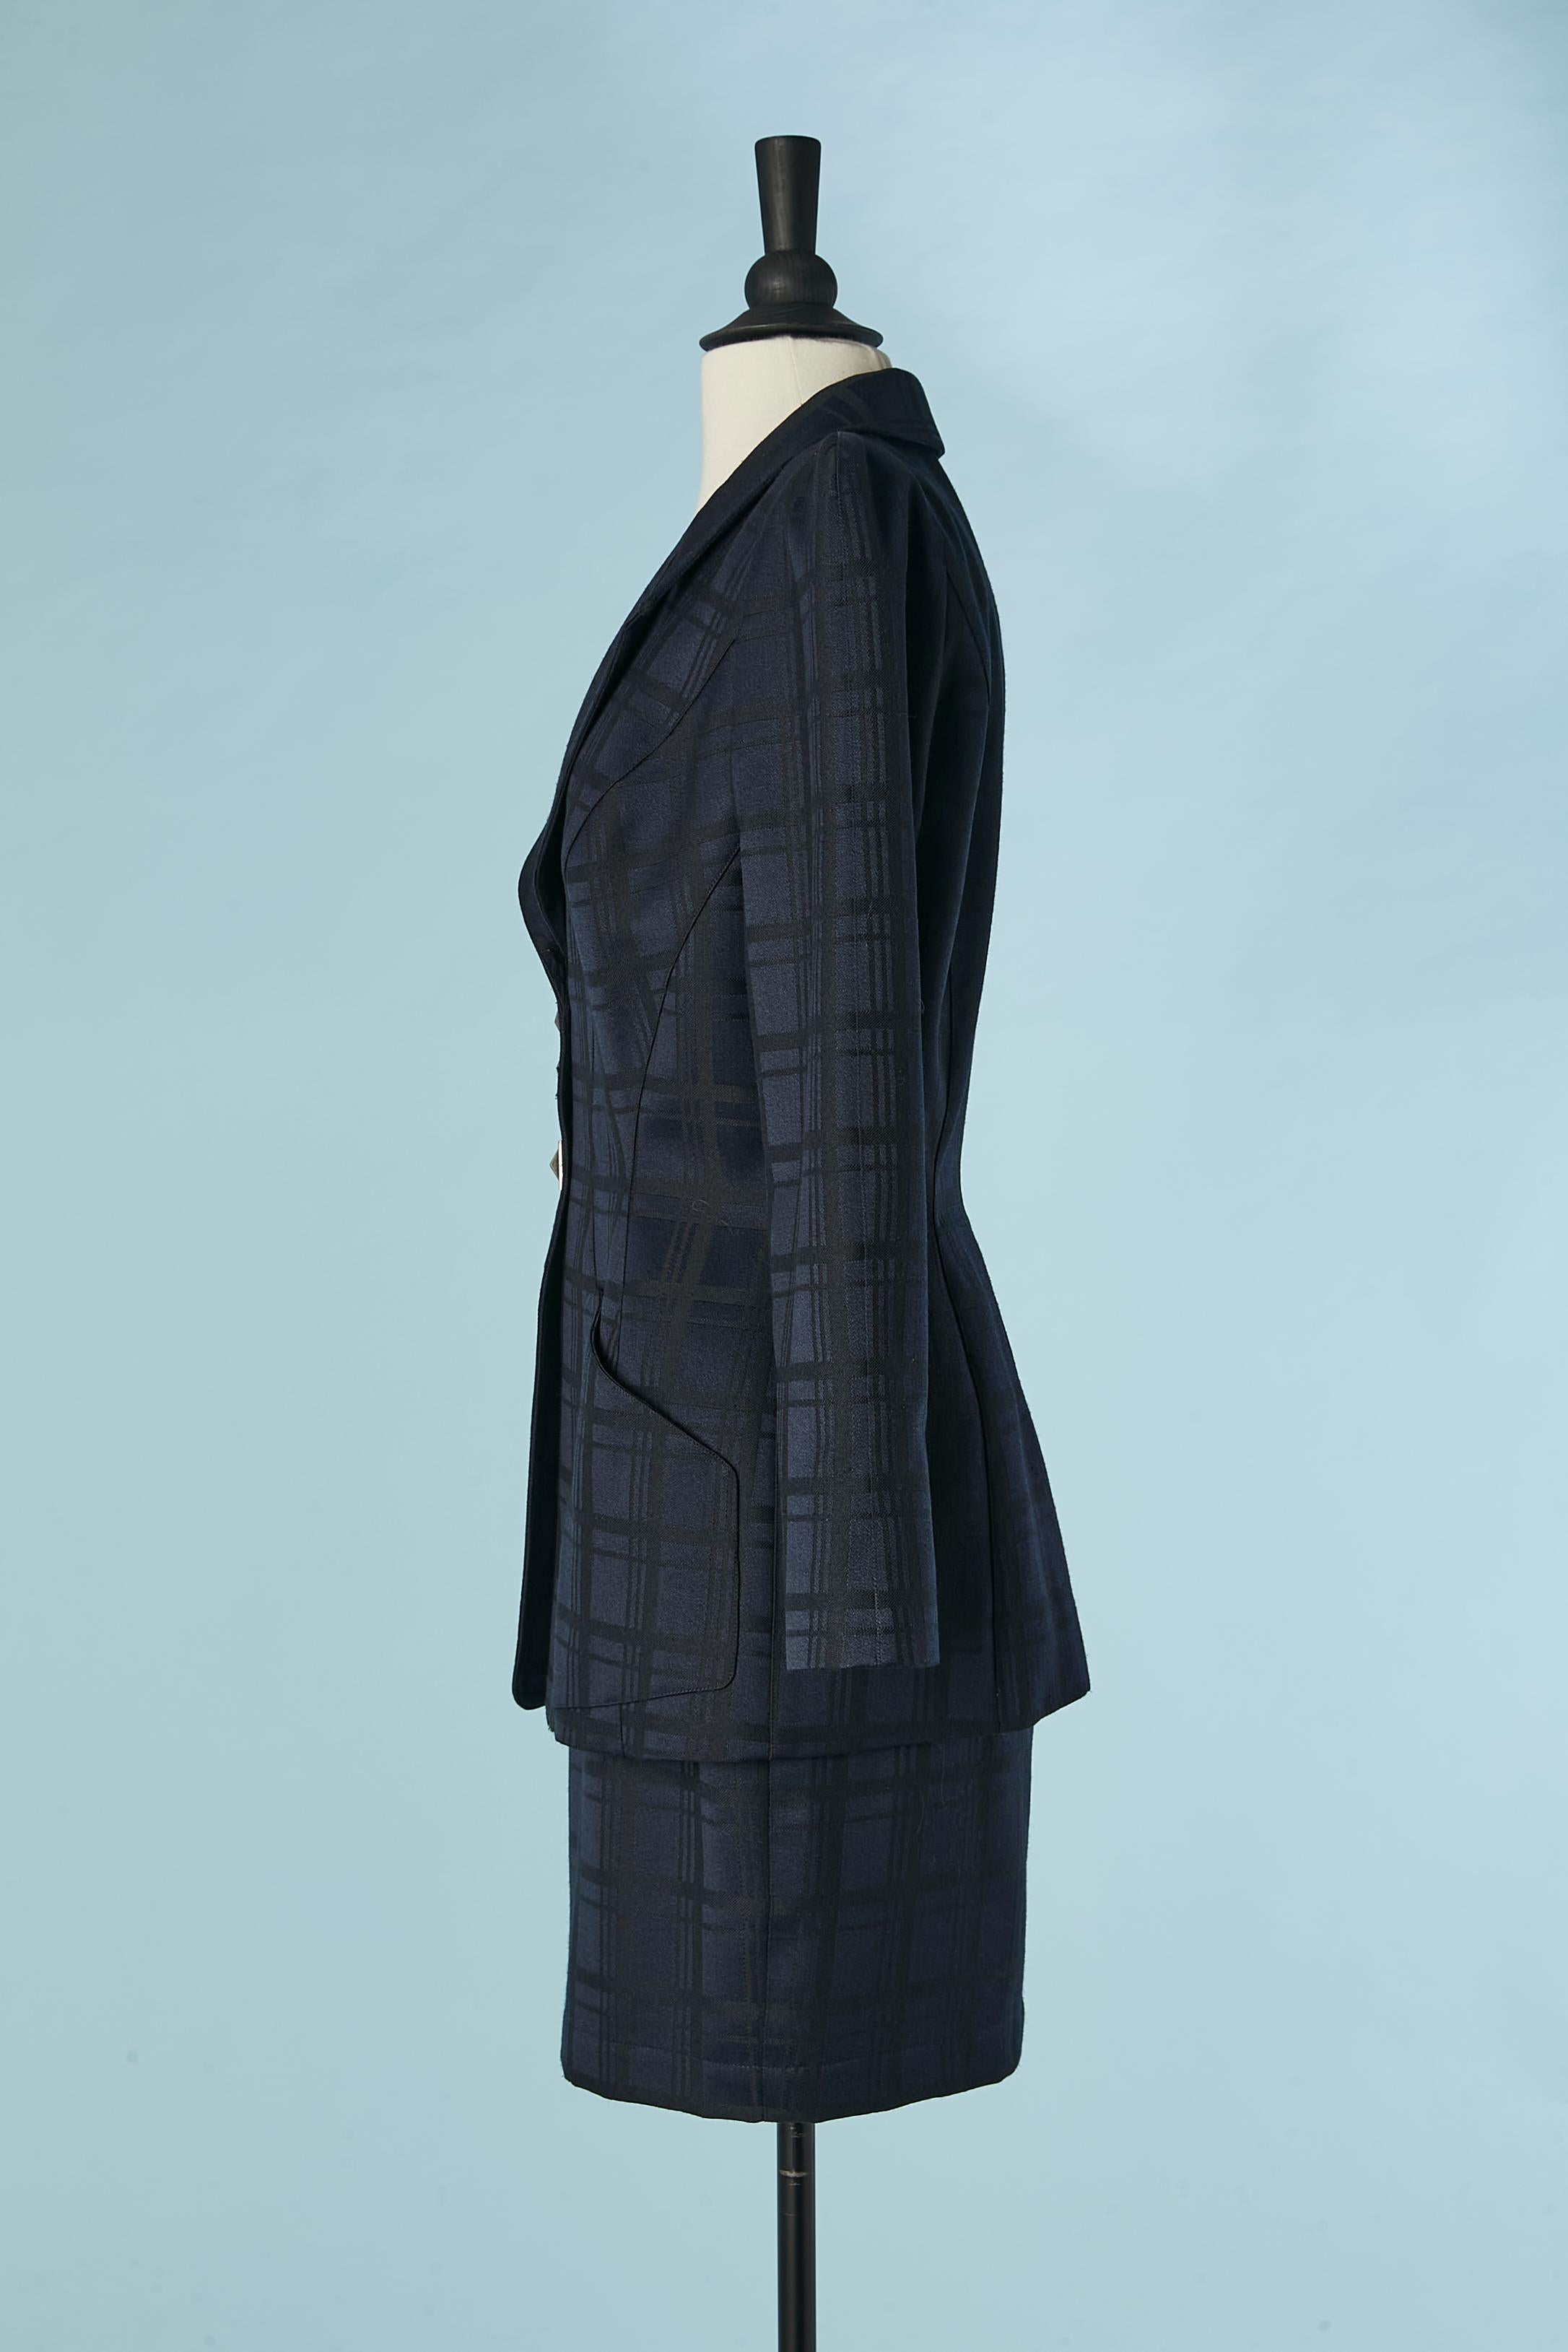 Navy blue and black check pattern jacquard skirt-suit Thierry Mugler Circa 1990 For Sale 1